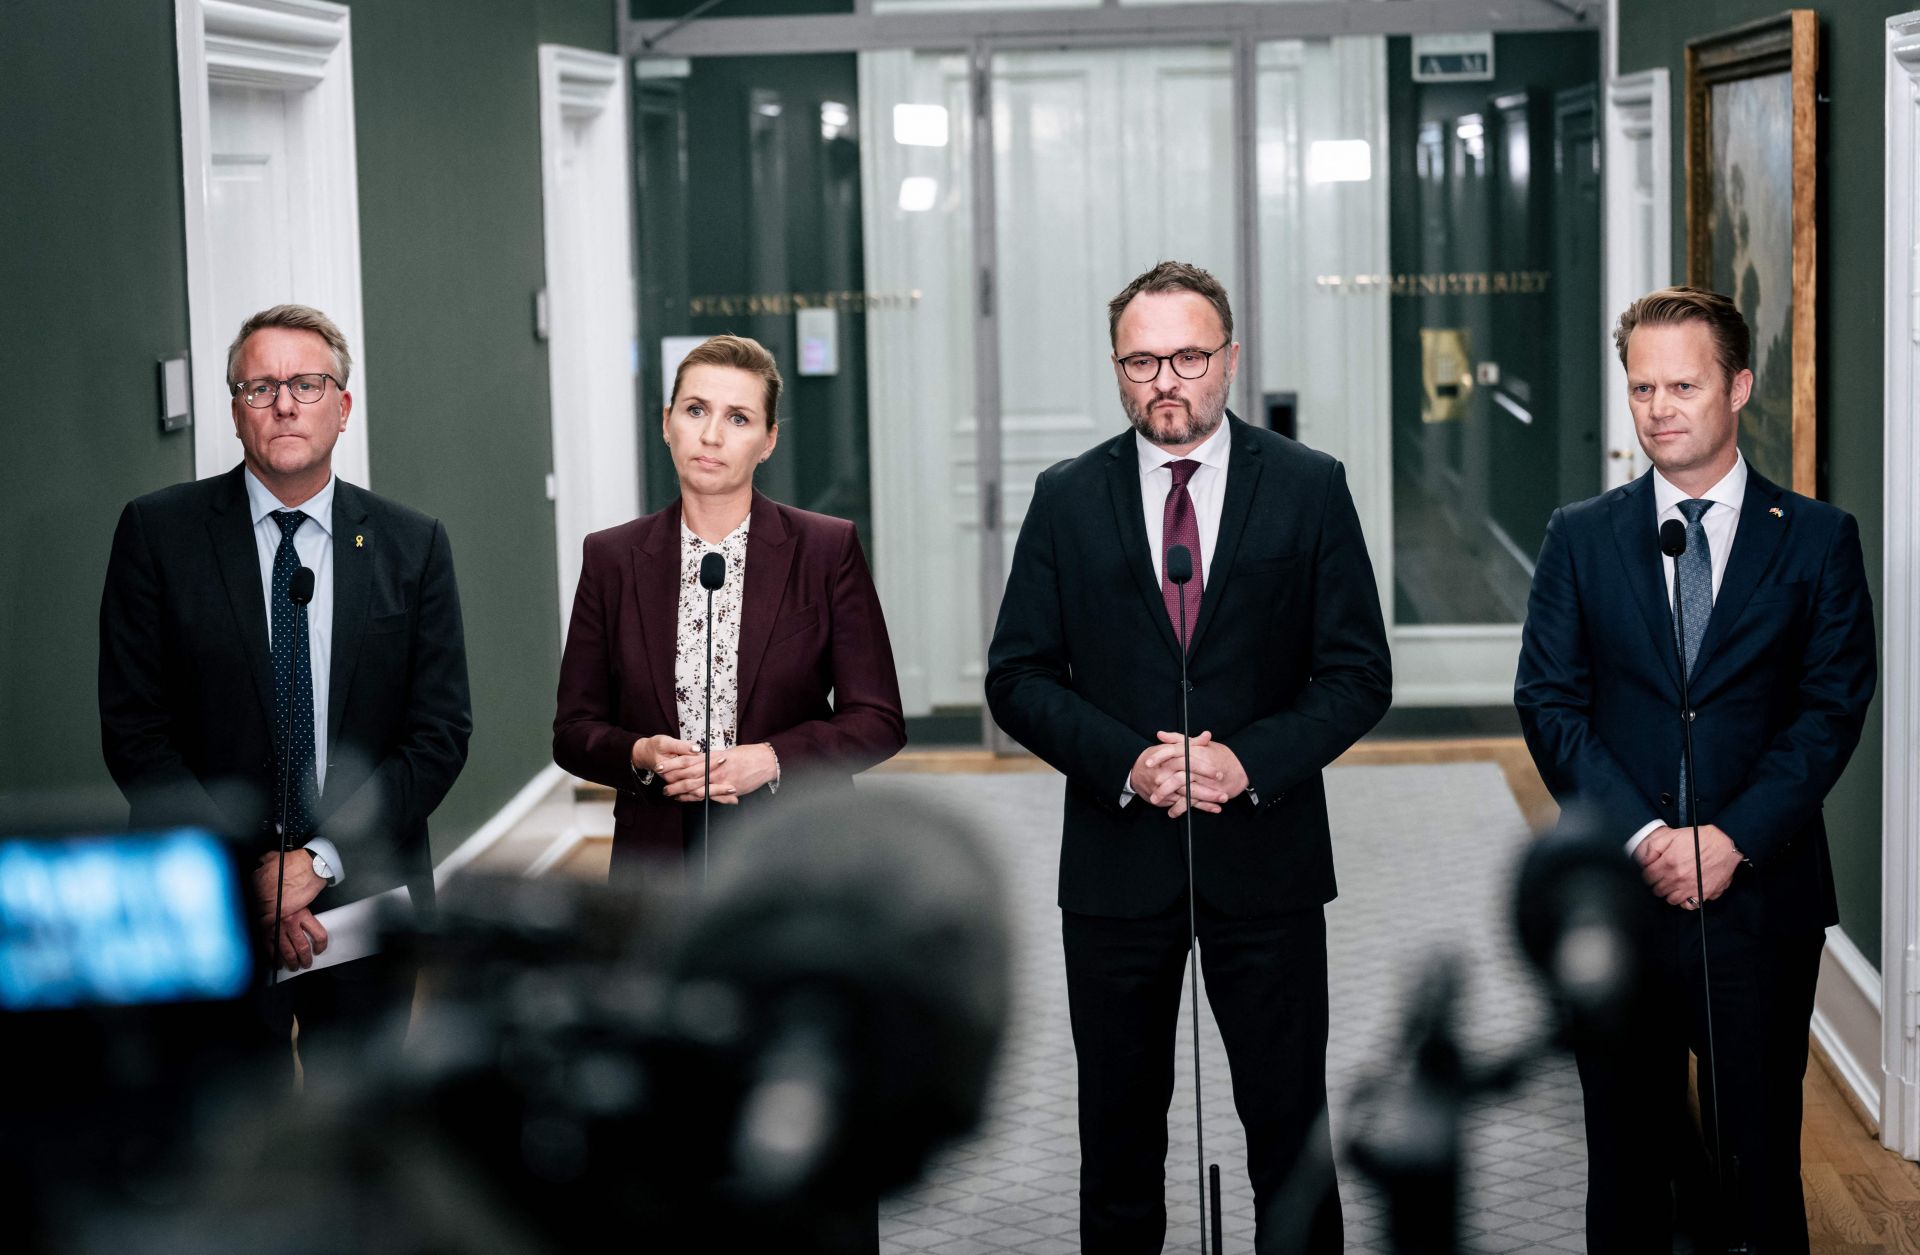 From left to right are Danish Minster of Defense Morten Bodskov, Danish Prime Minister Mette Frederiksen, Danish Climate Minister Dan Joergensen and Danish Minister of Foreign Affairs Jeppe Kofod. The ministers are speaking to the press about three gas leaks on the Nord Stream gas pipelines in the Baltic Sea at a doorstep in Copenhagen on Sept. 27.